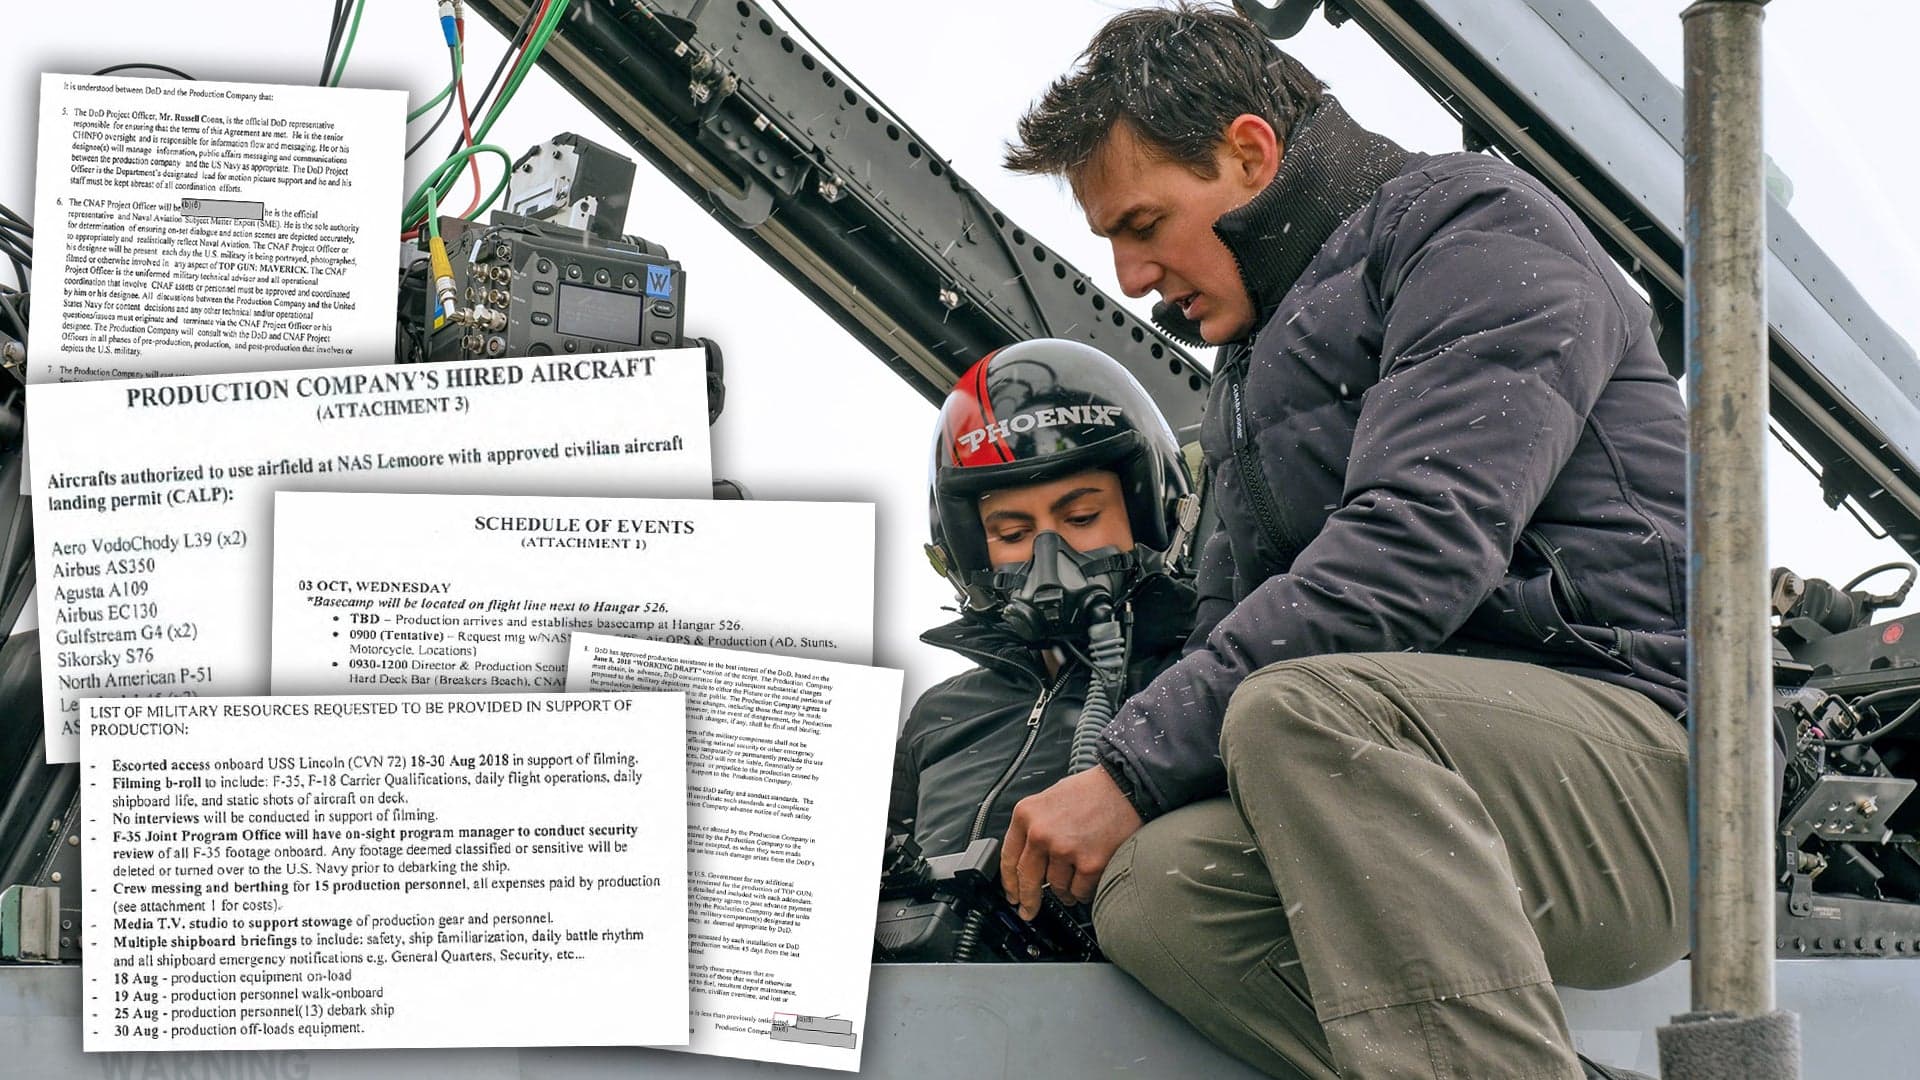 Top Gun: Maverick’s Massive Support From The U.S. Military Is Laid Out In These Documents